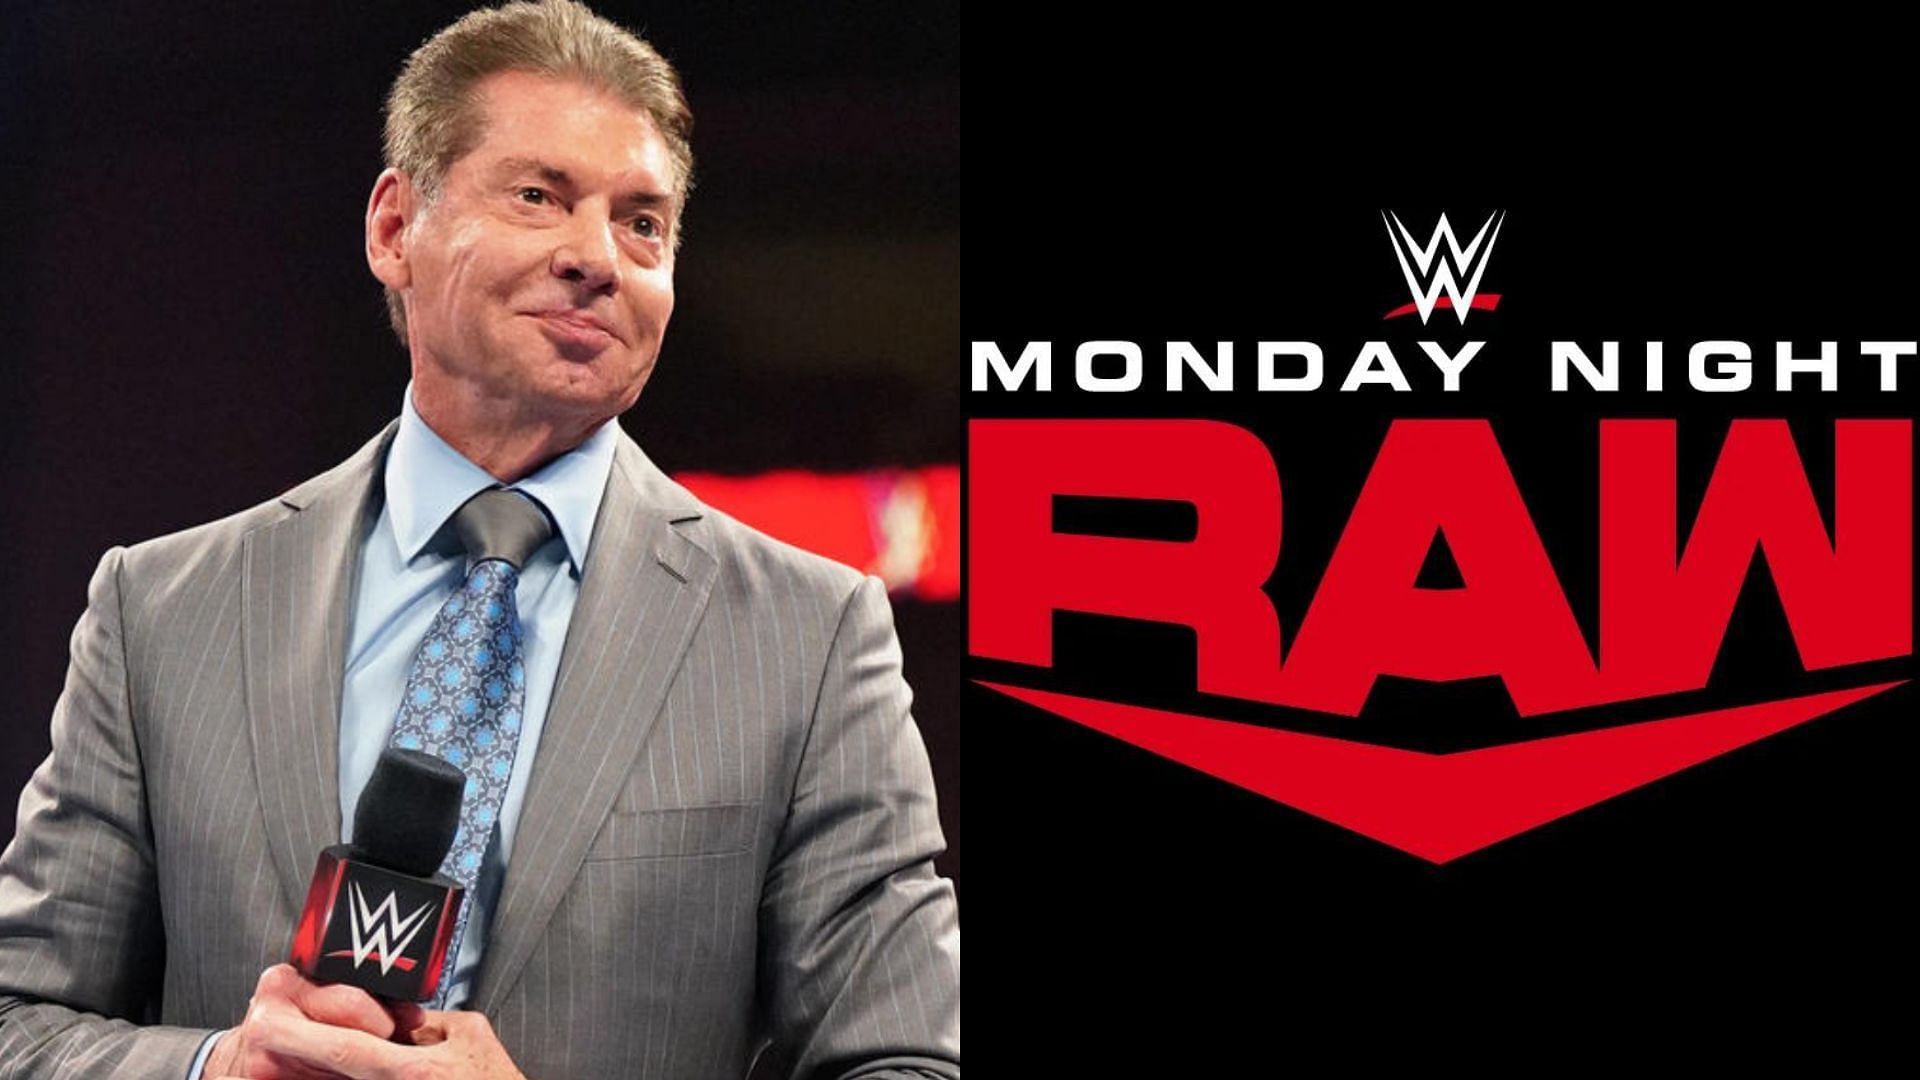 Vince McMahon recently returned to WWE after stepping away.